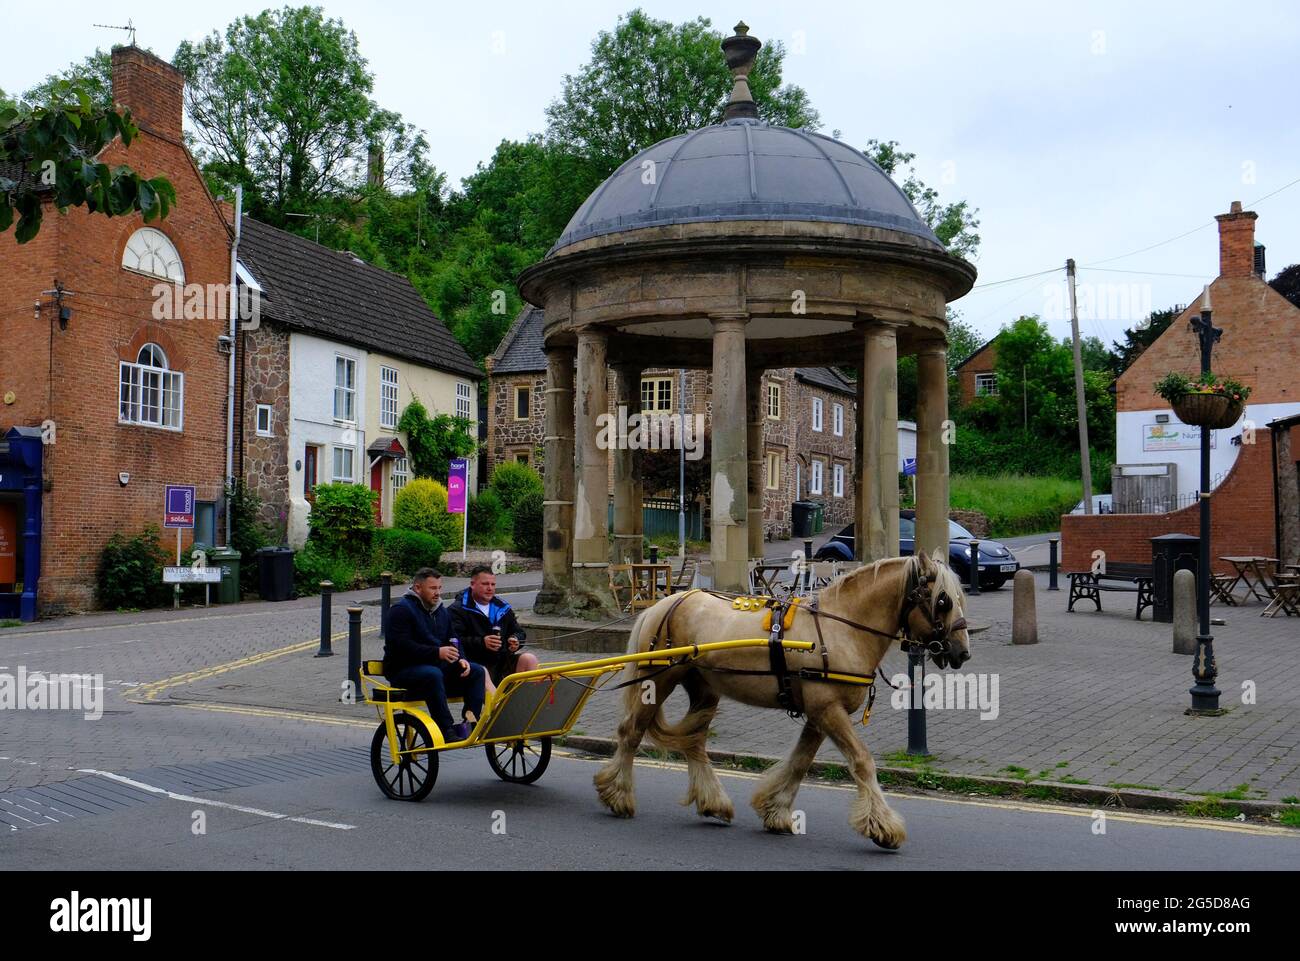 Mountsorrel, Leicestershire, UK. 26th June 2021. A pony and trap is driven through the village during the Betty Hensers Horse Fair. Leicestershire Police and Charnwood Borough Council are working together to offer guidance and support to the organisers after concerns about possible breaches in Covid-19 regulations and the impact on local communities. Credit Darren Staples/Alamy Live News. Stock Photo